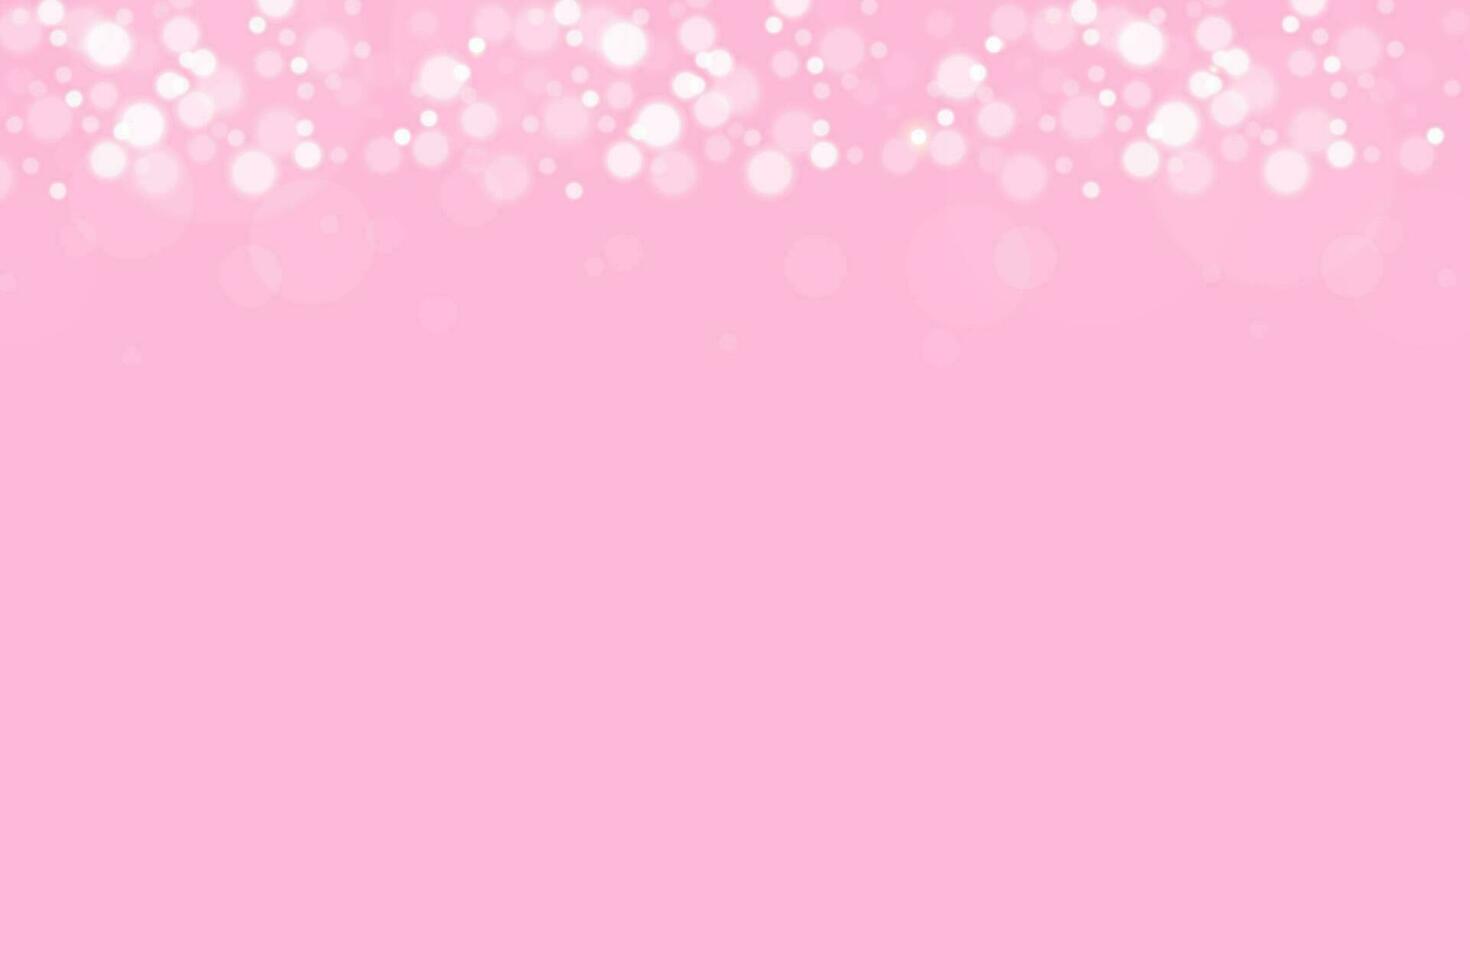 Gentle pink background with glowing bokeh. Luminous particles fall from above. Vector template for girly holiday designs